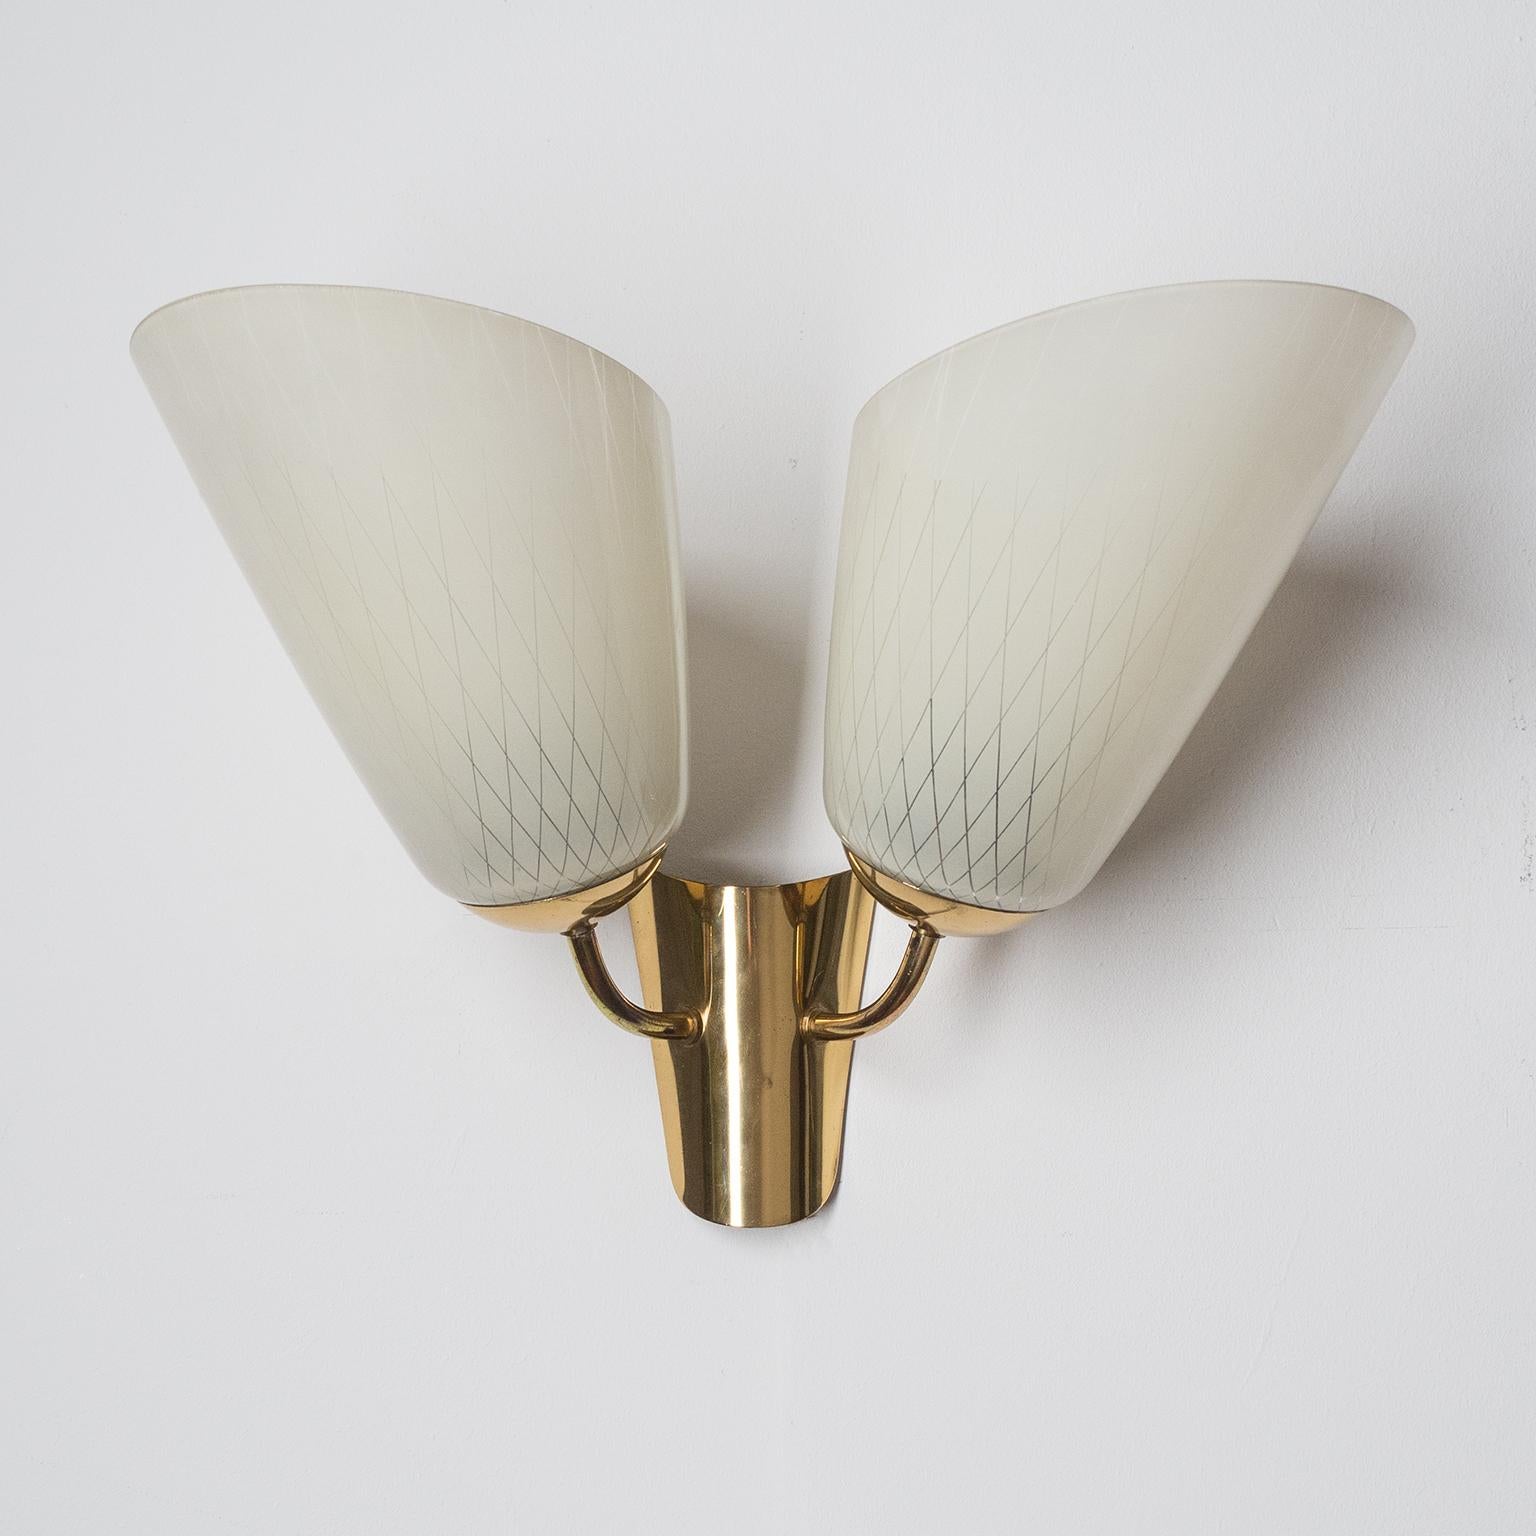 Two-arm wall light from the 1940s. Brass hardware with two blown glass diffusers which are ivory-color enameled on the inside with a diamond pinstripe decor. Two original brass E27 sockets.